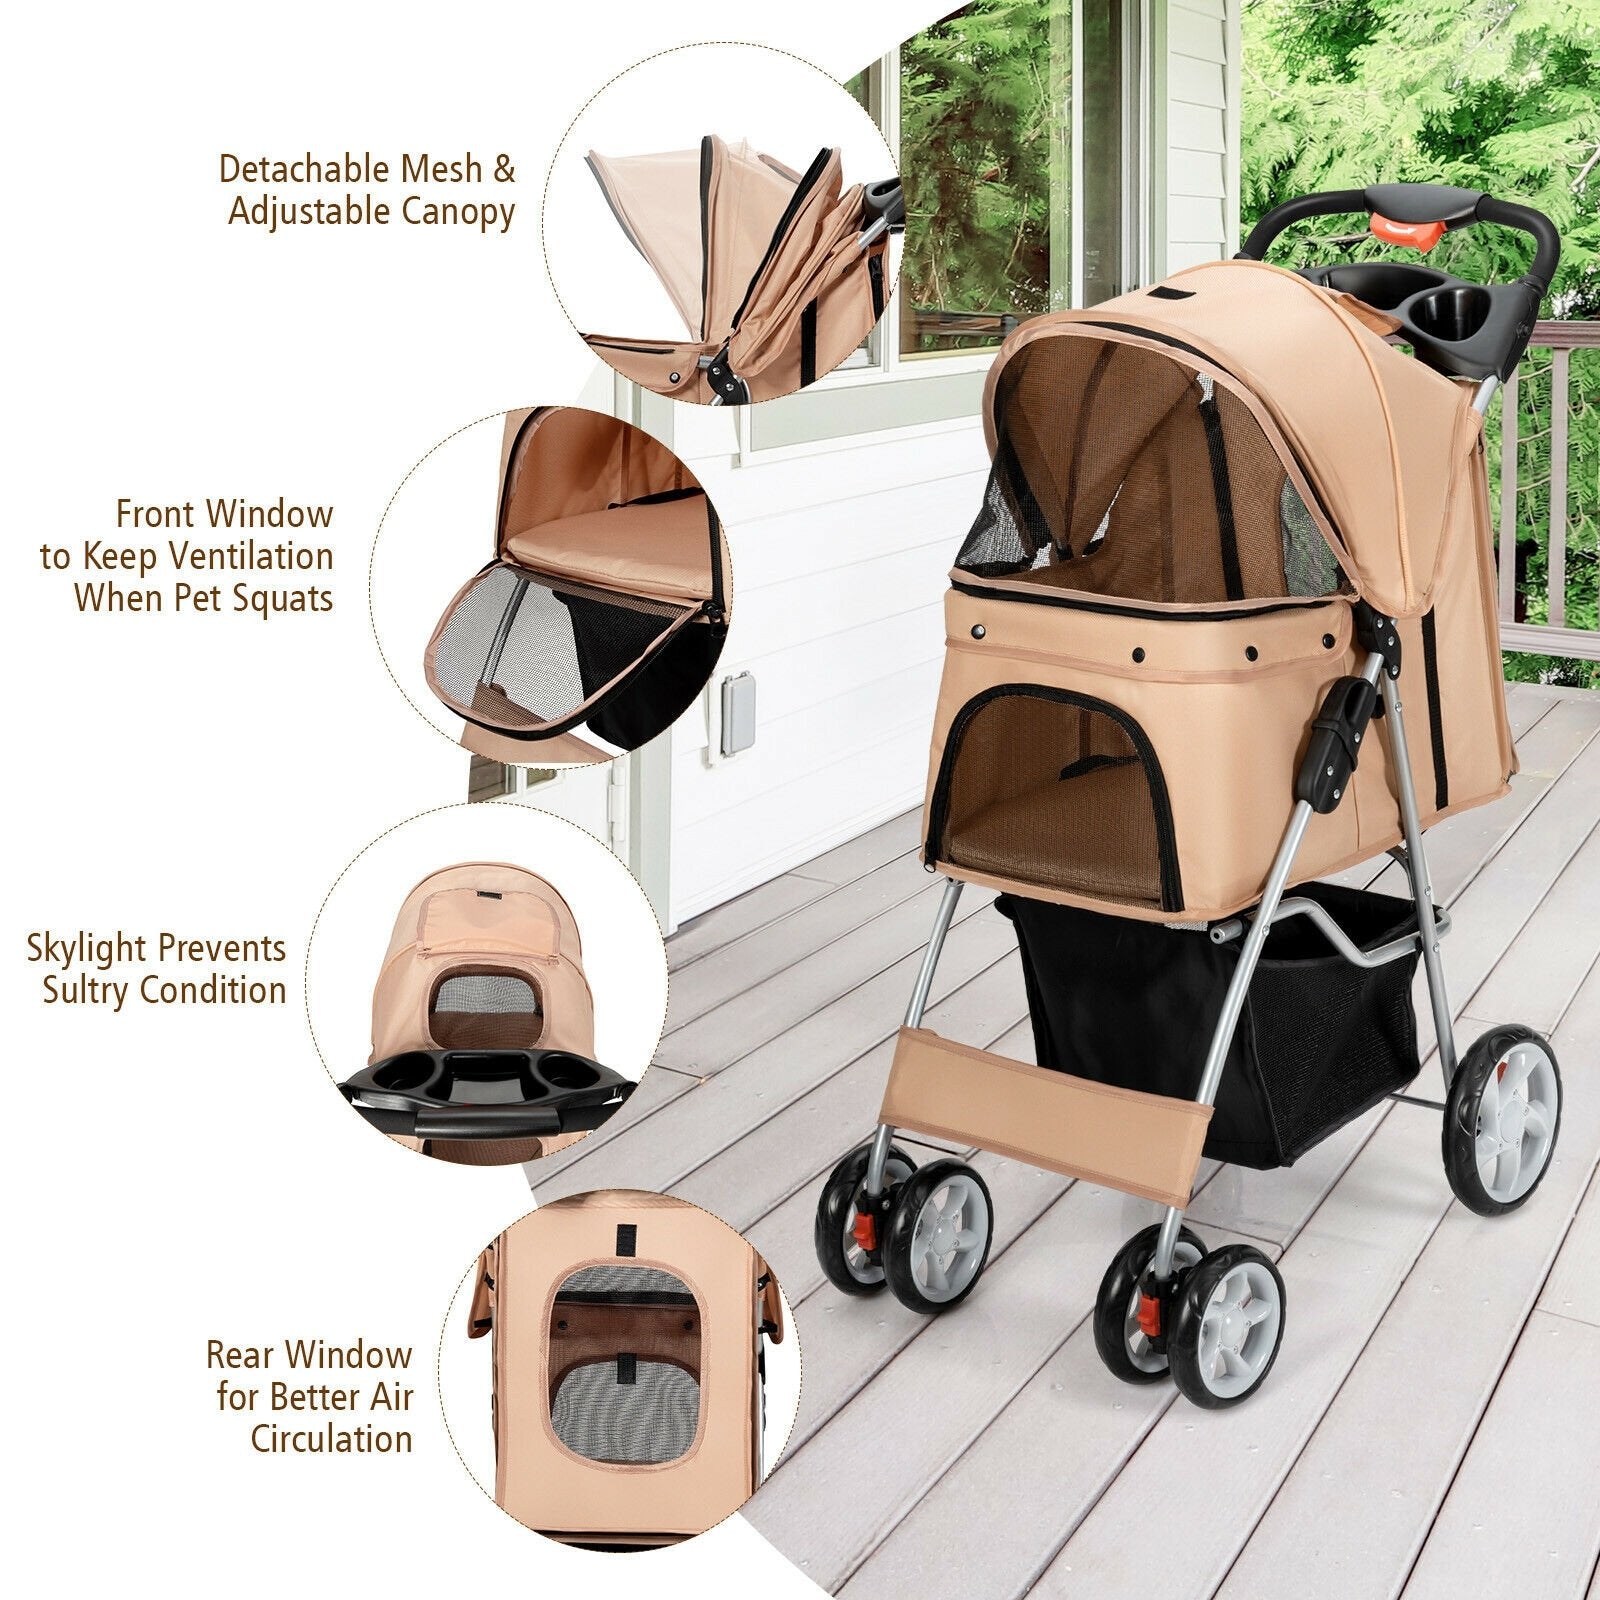 Foldable 4-Wheel Pet Stroller with Storage Basket, Beige at Gallery Canada